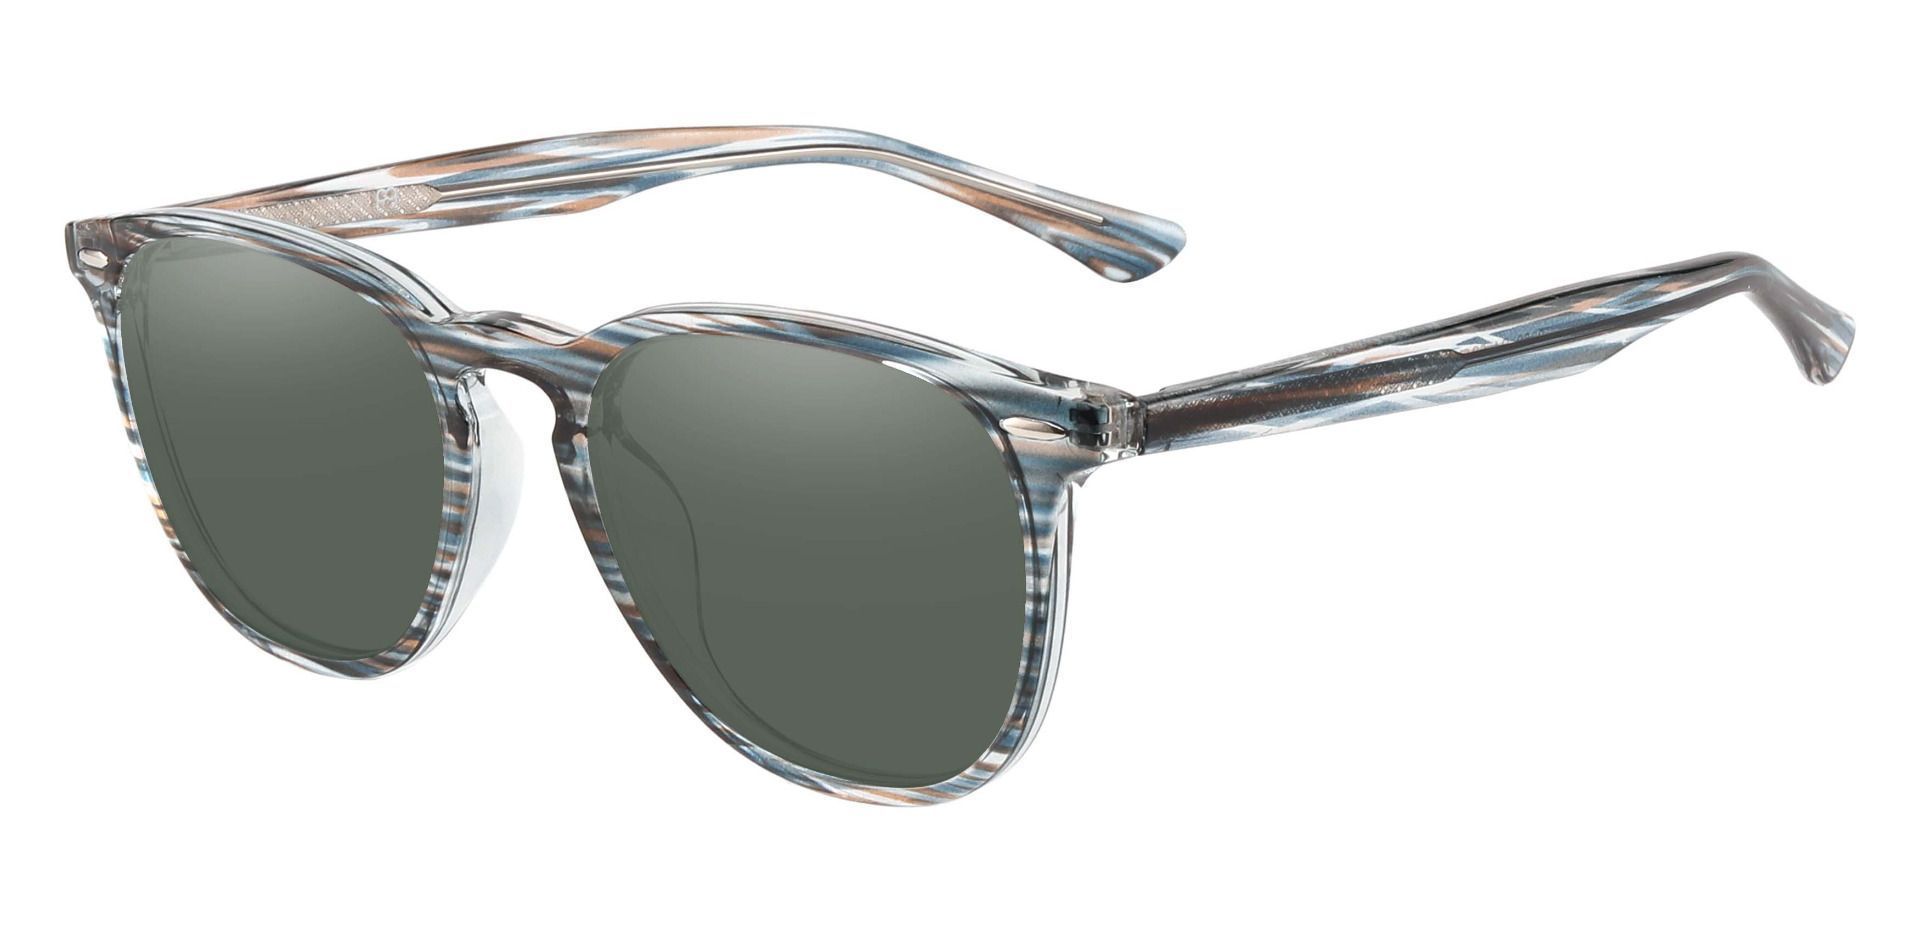 Sycamore Oval Lined Bifocal Sunglasses - Blue Frame With Green Lenses